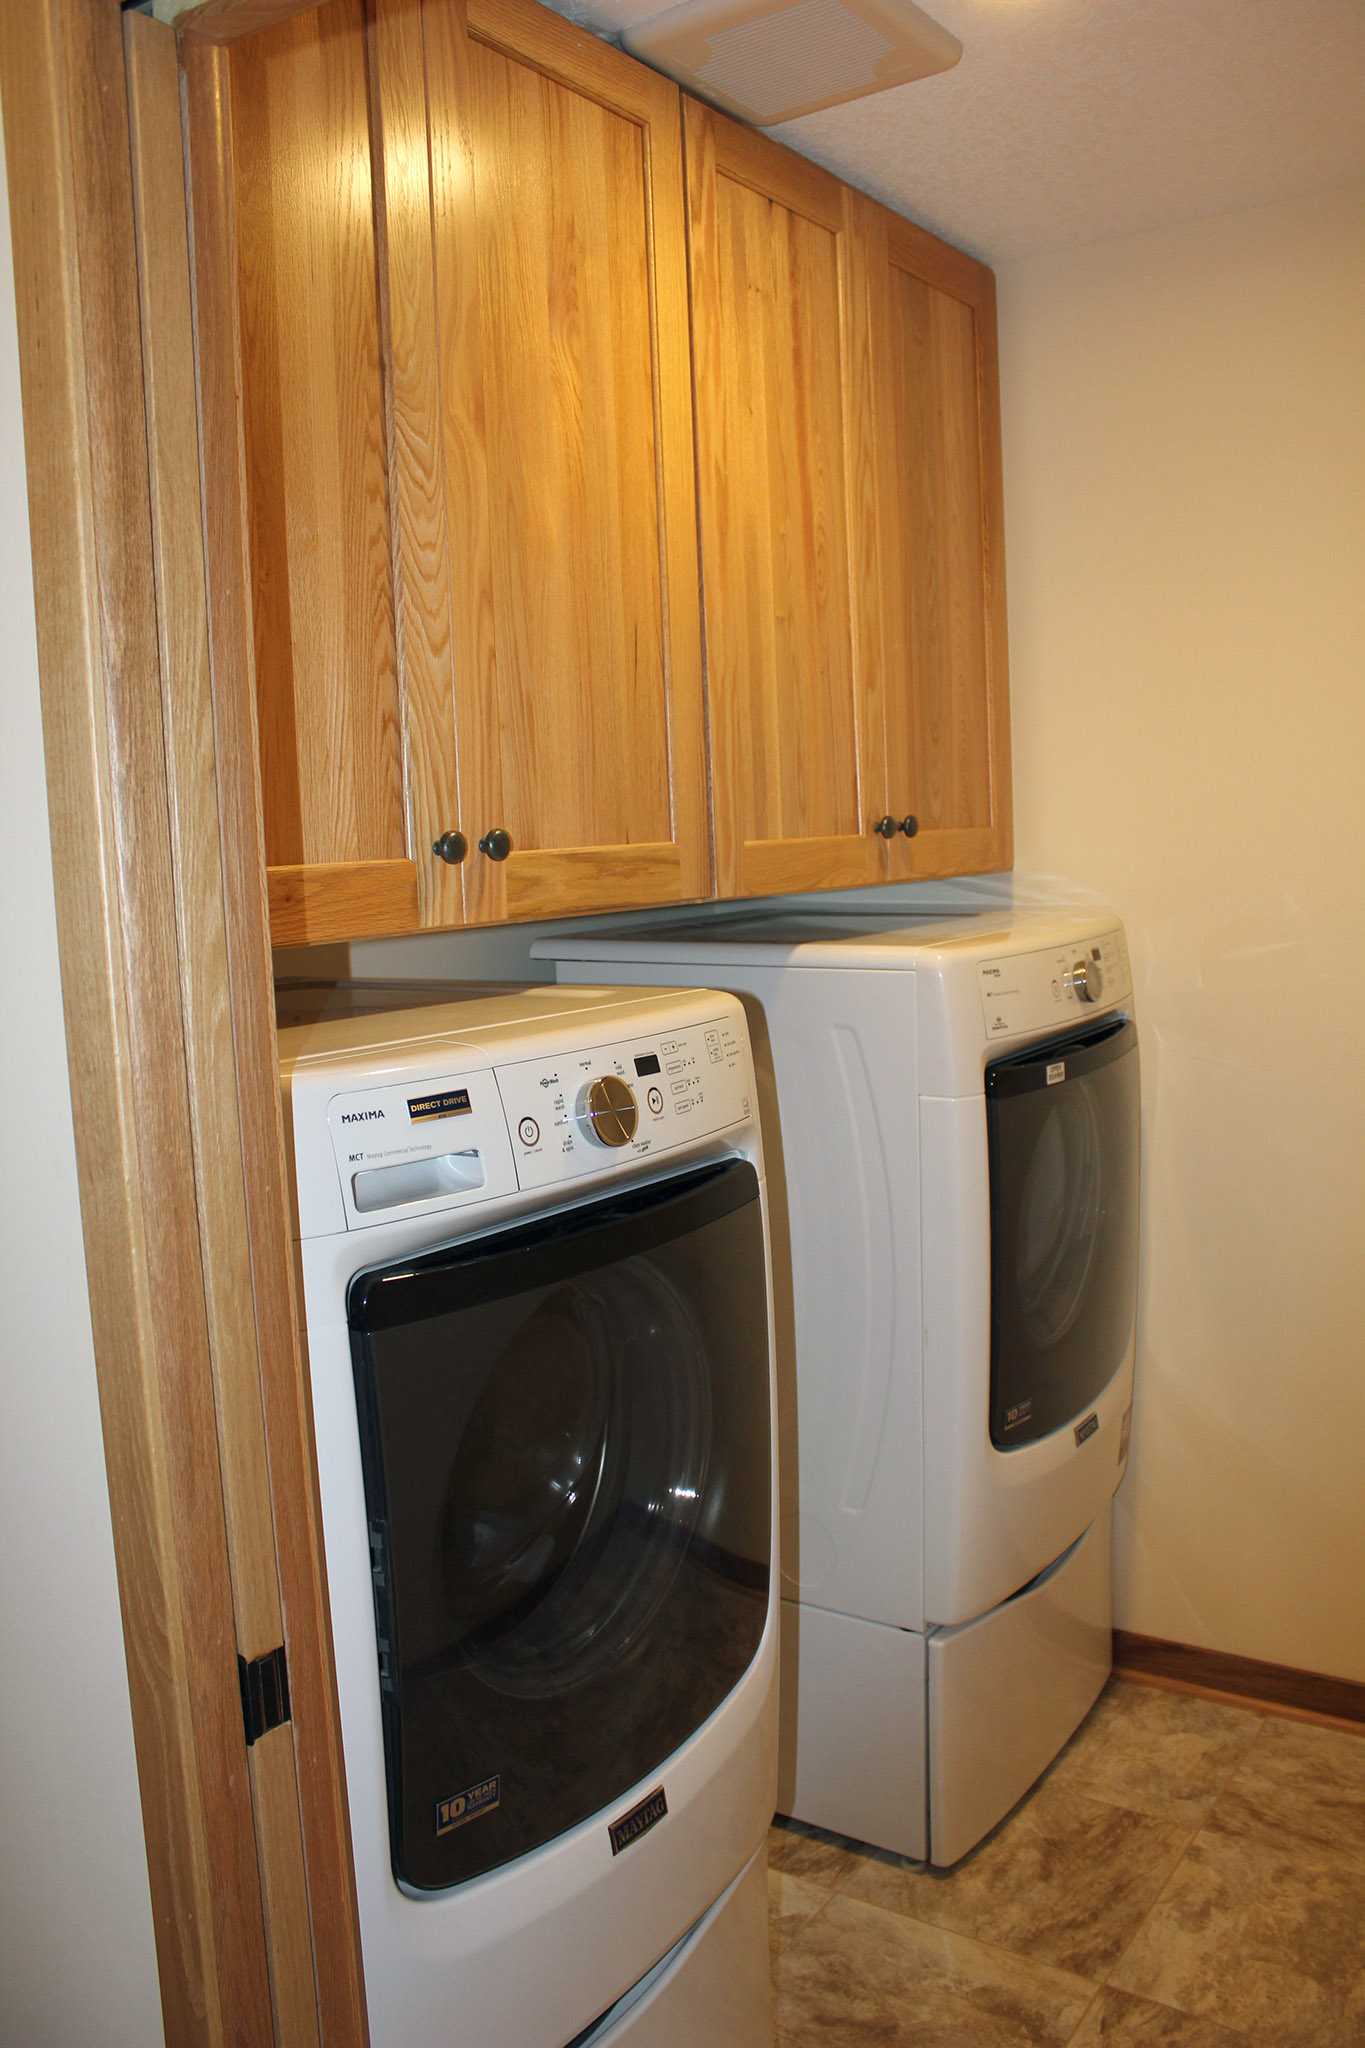 Laundry room with built-in cabinets